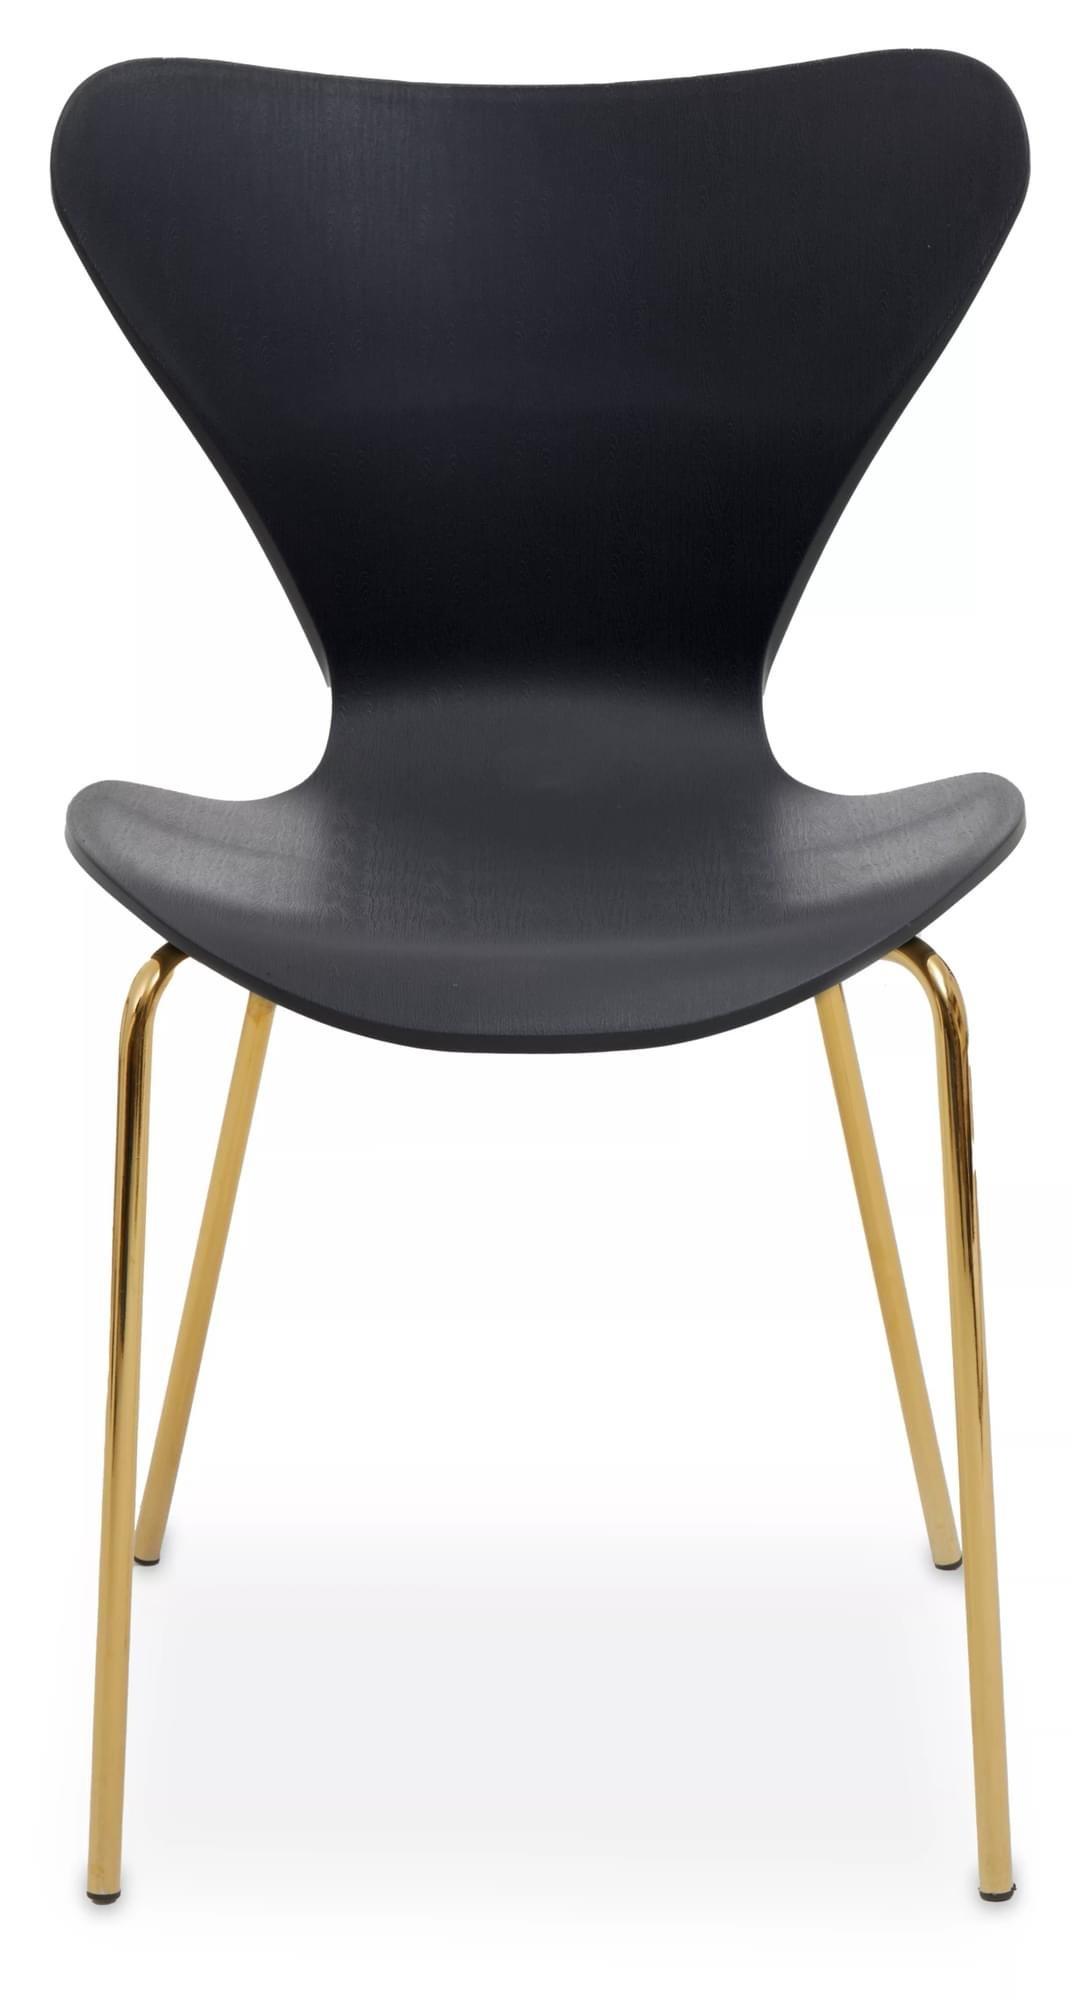 Interiors by Premier Laila Dining Chair